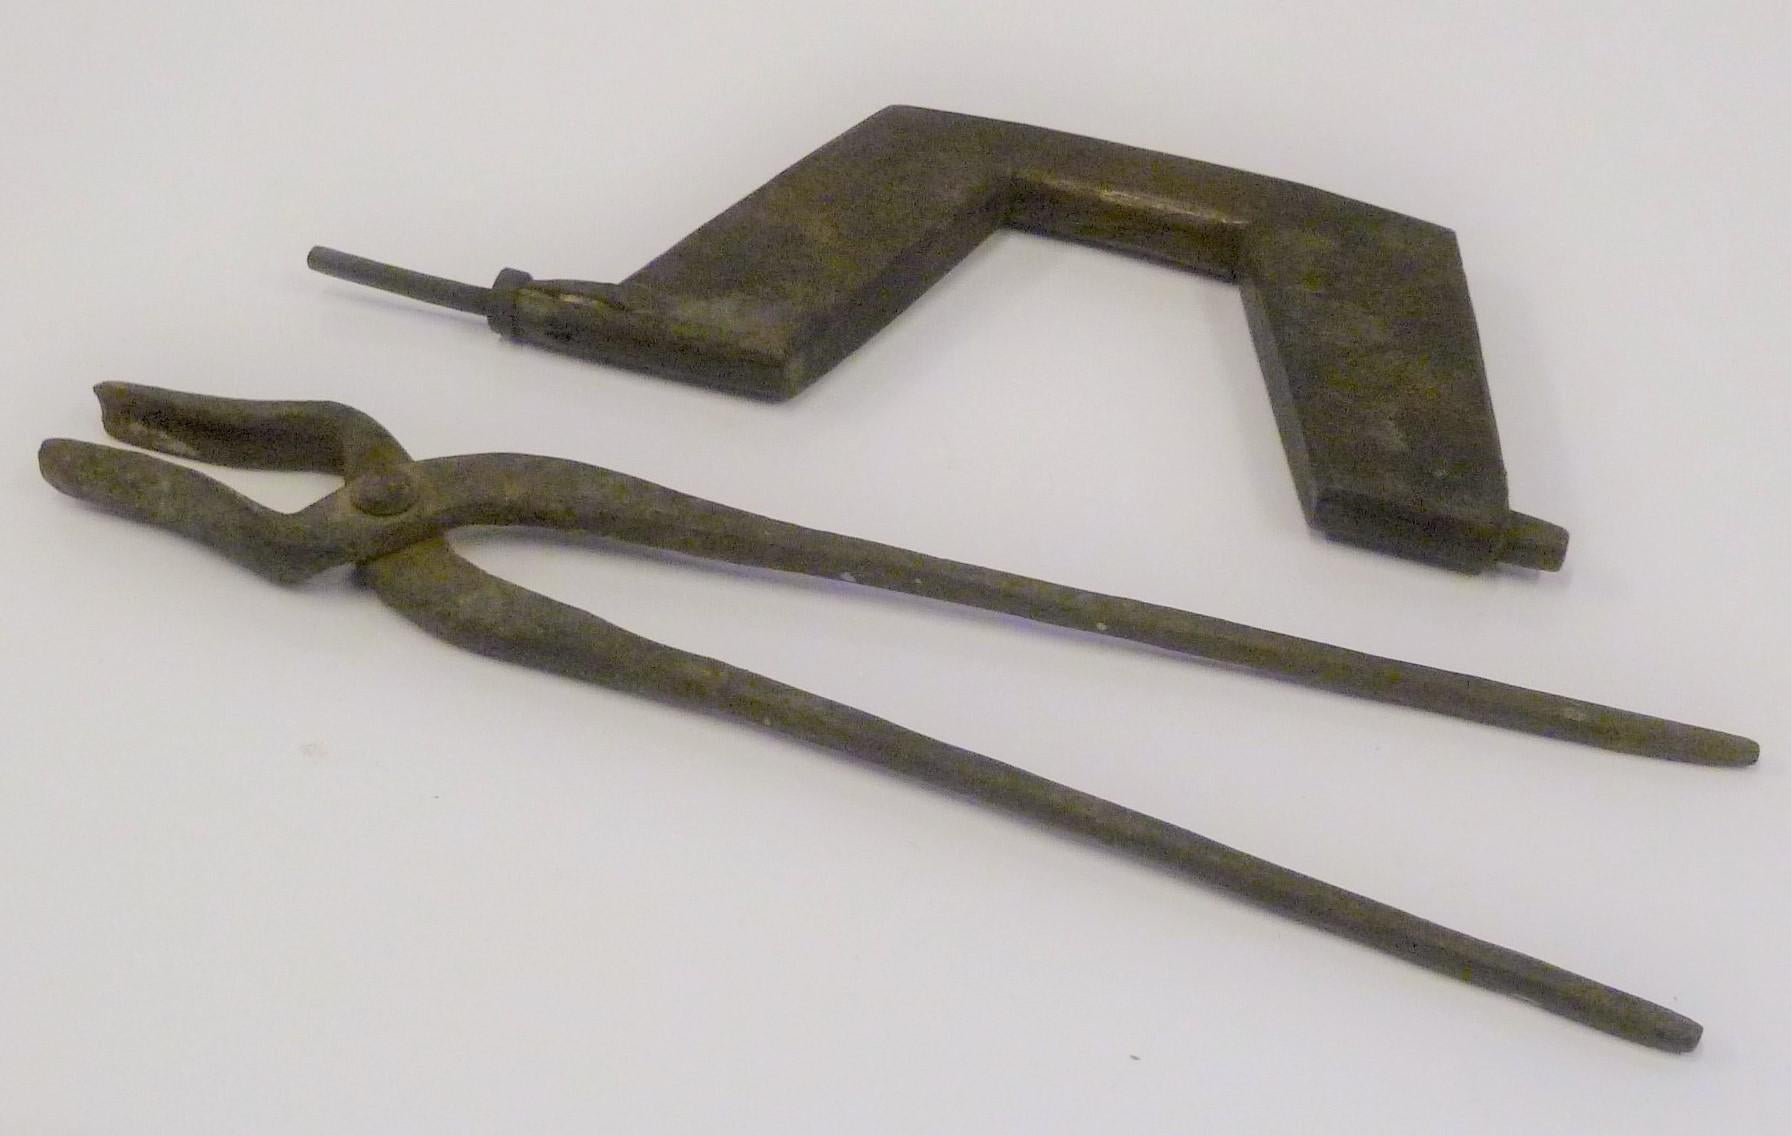 REDUCED FROM $225....Antique Japanese Tools, a Blacksmith Tong Pincer and Woodcarver Brace Drill, both early 20th century. Most likely late Meiji Period. The tong or pincer is sculpturally pleasing to the eye and made out of forged iron in good